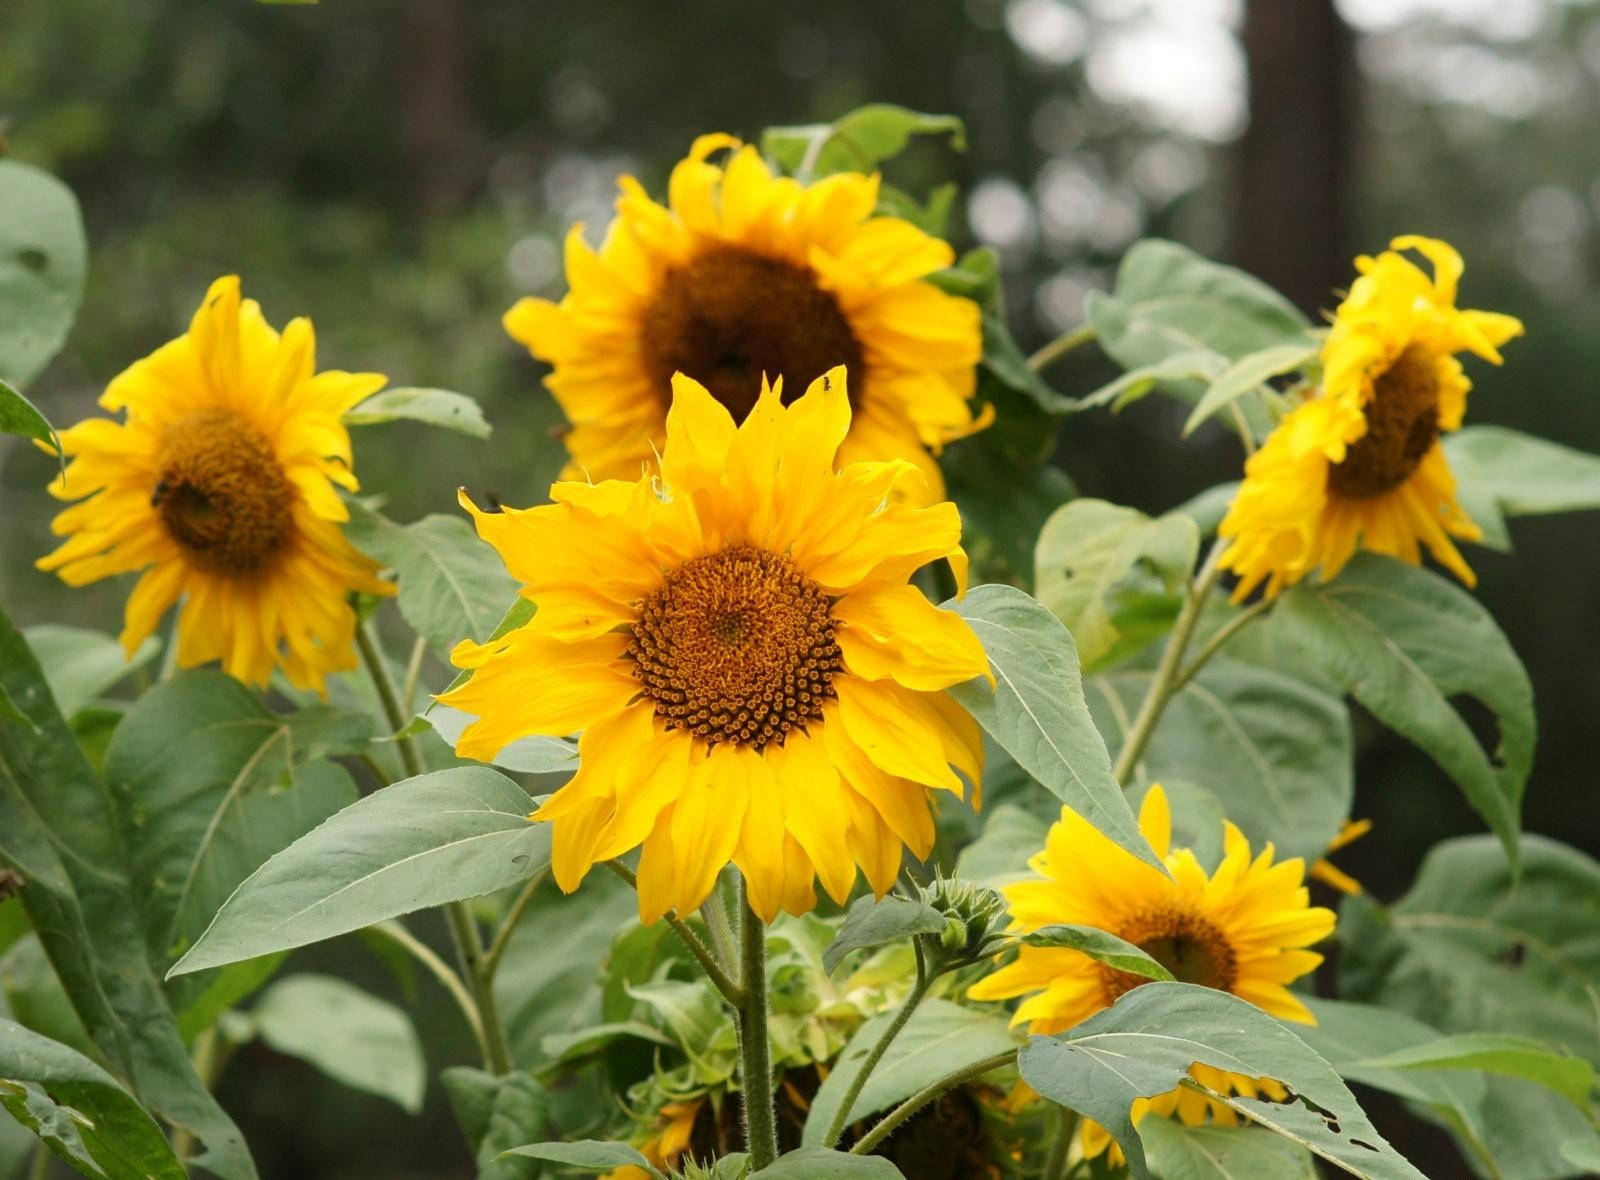 Sunflowers with bright yellow petals in a garden. 